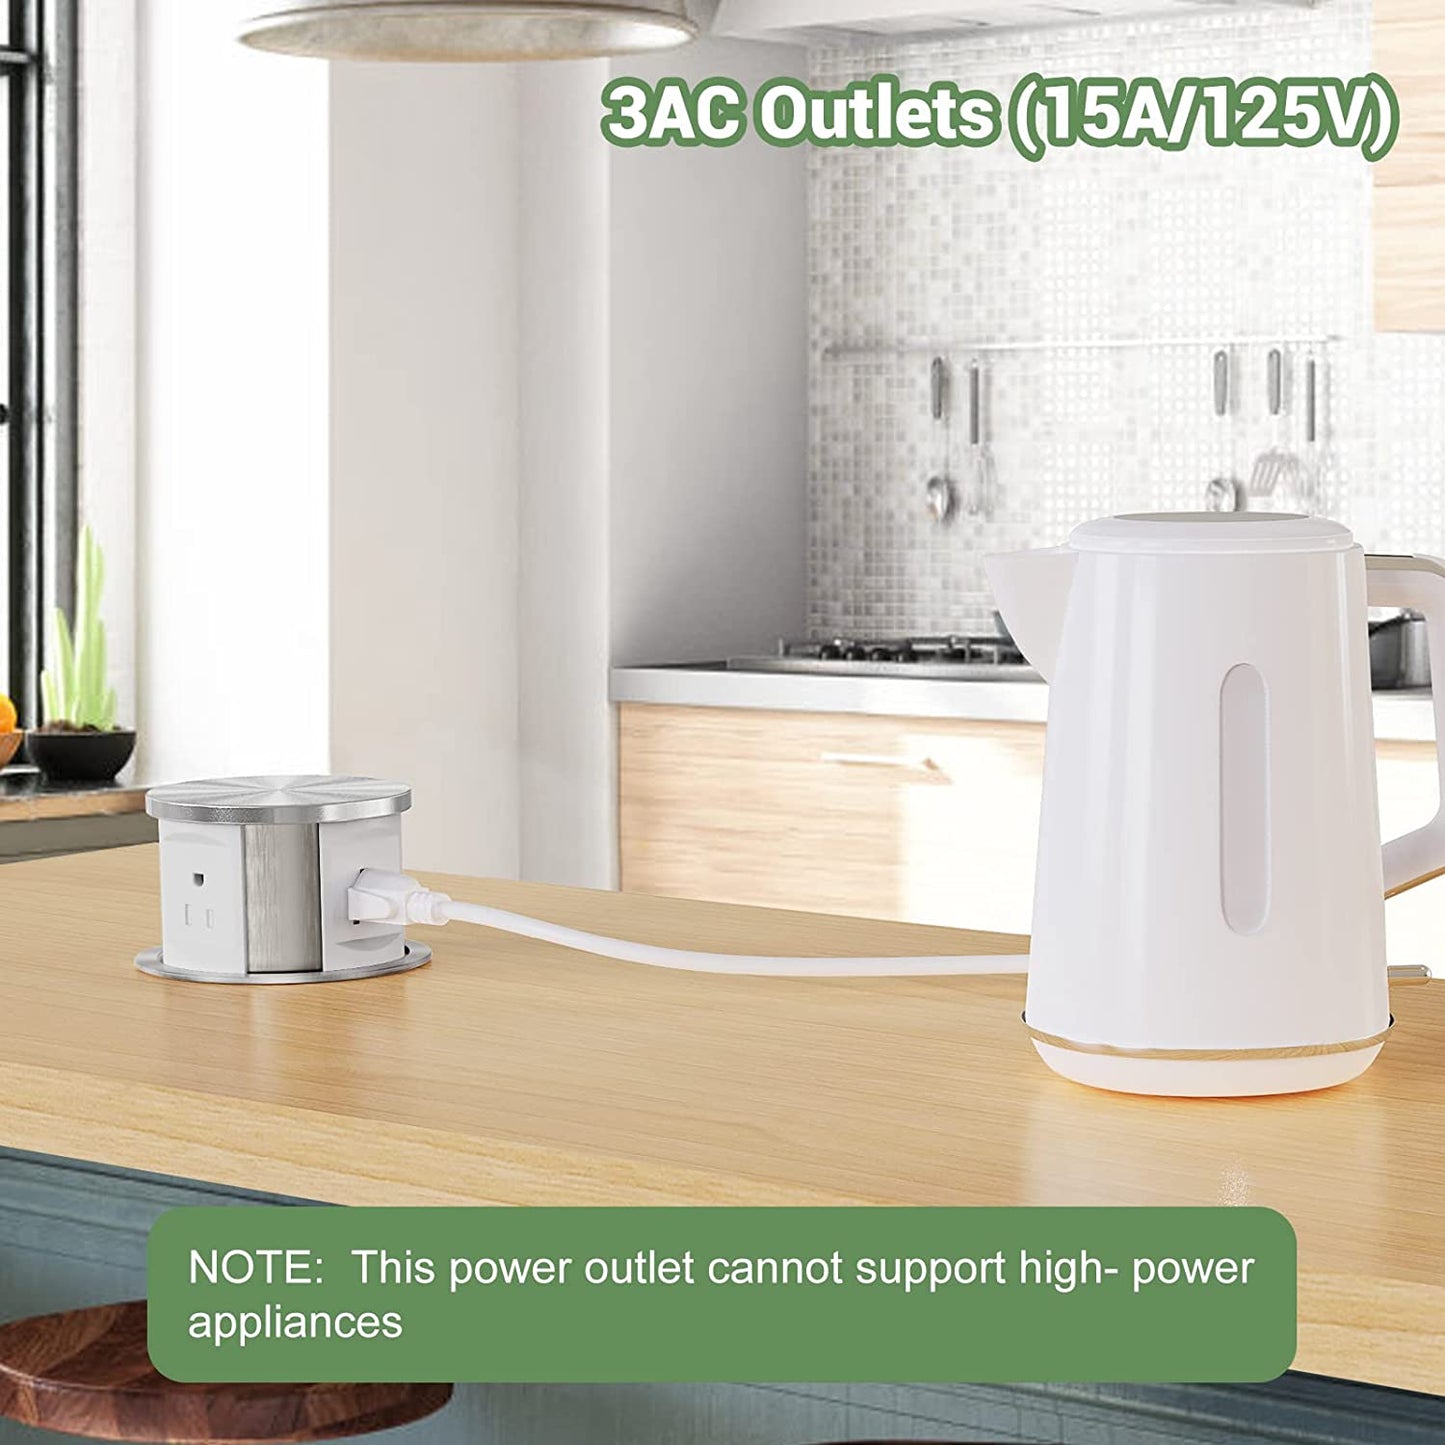 Automatic Pop Up Power Outlet for Kitchen Table